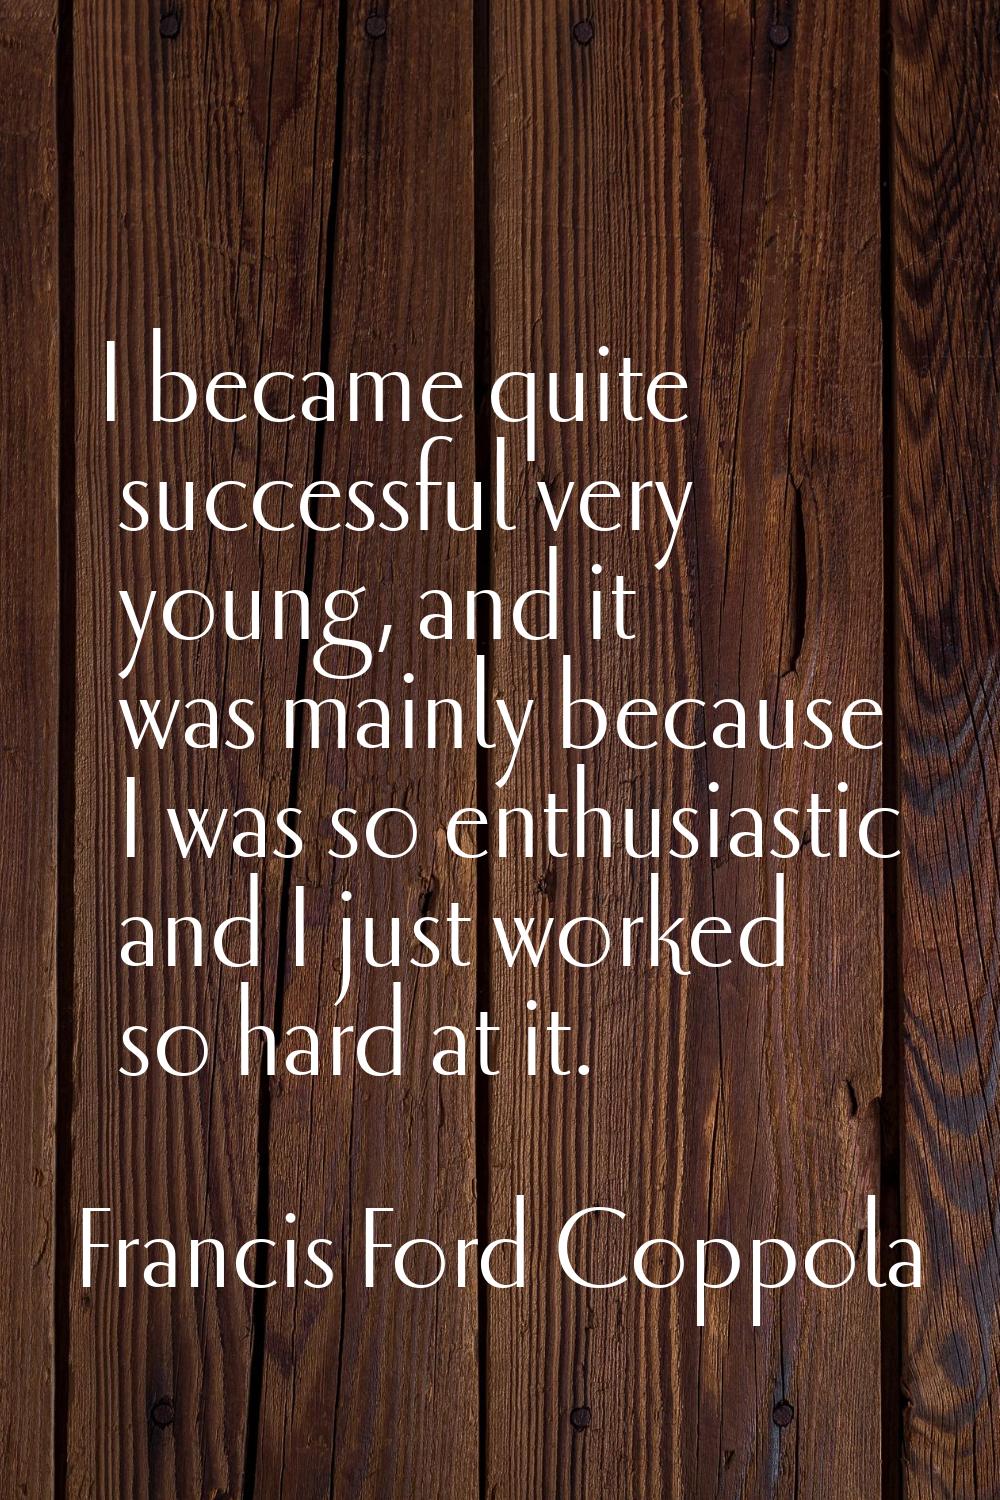 I became quite successful very young, and it was mainly because I was so enthusiastic and I just wo